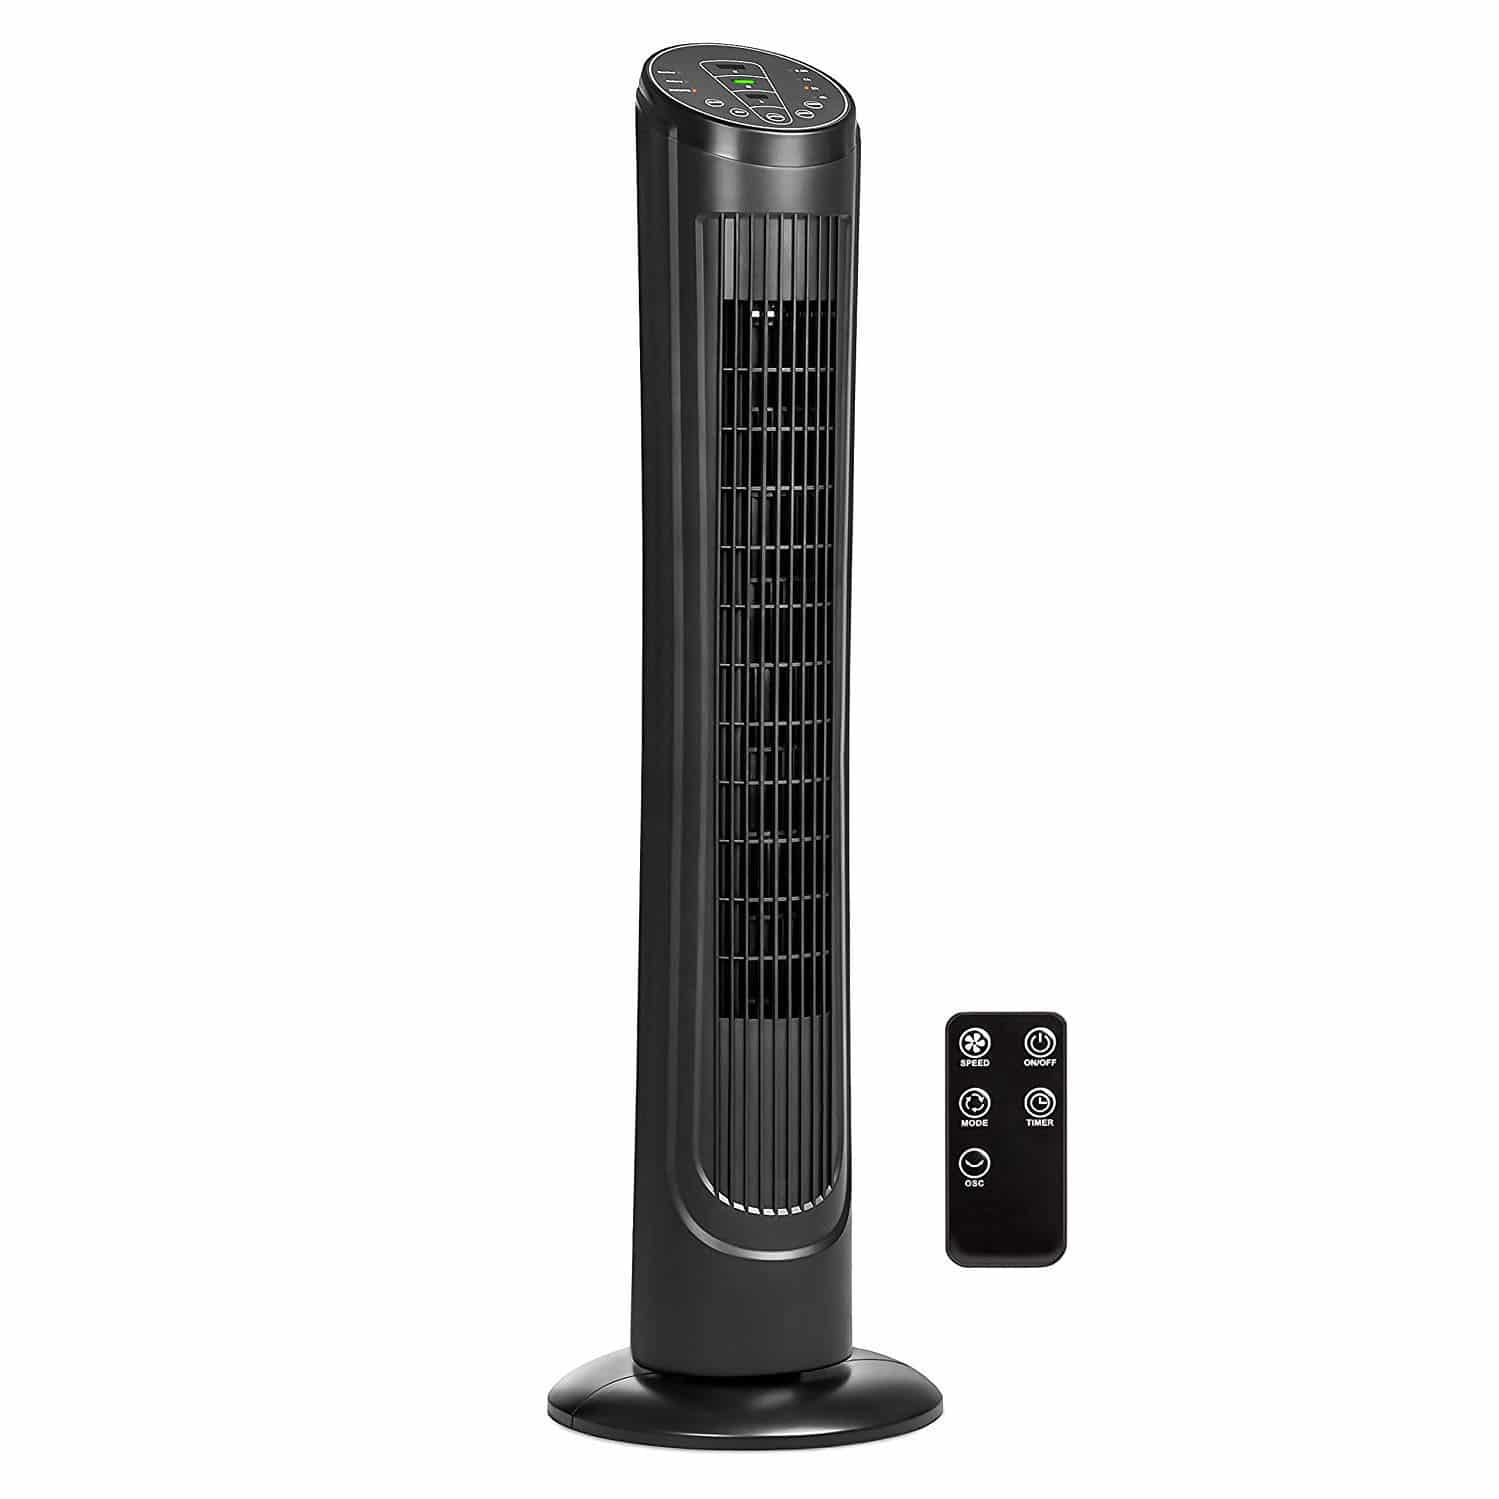 Top 10 Best Tower Fans in 2021 Reviews | Buyer's Guide